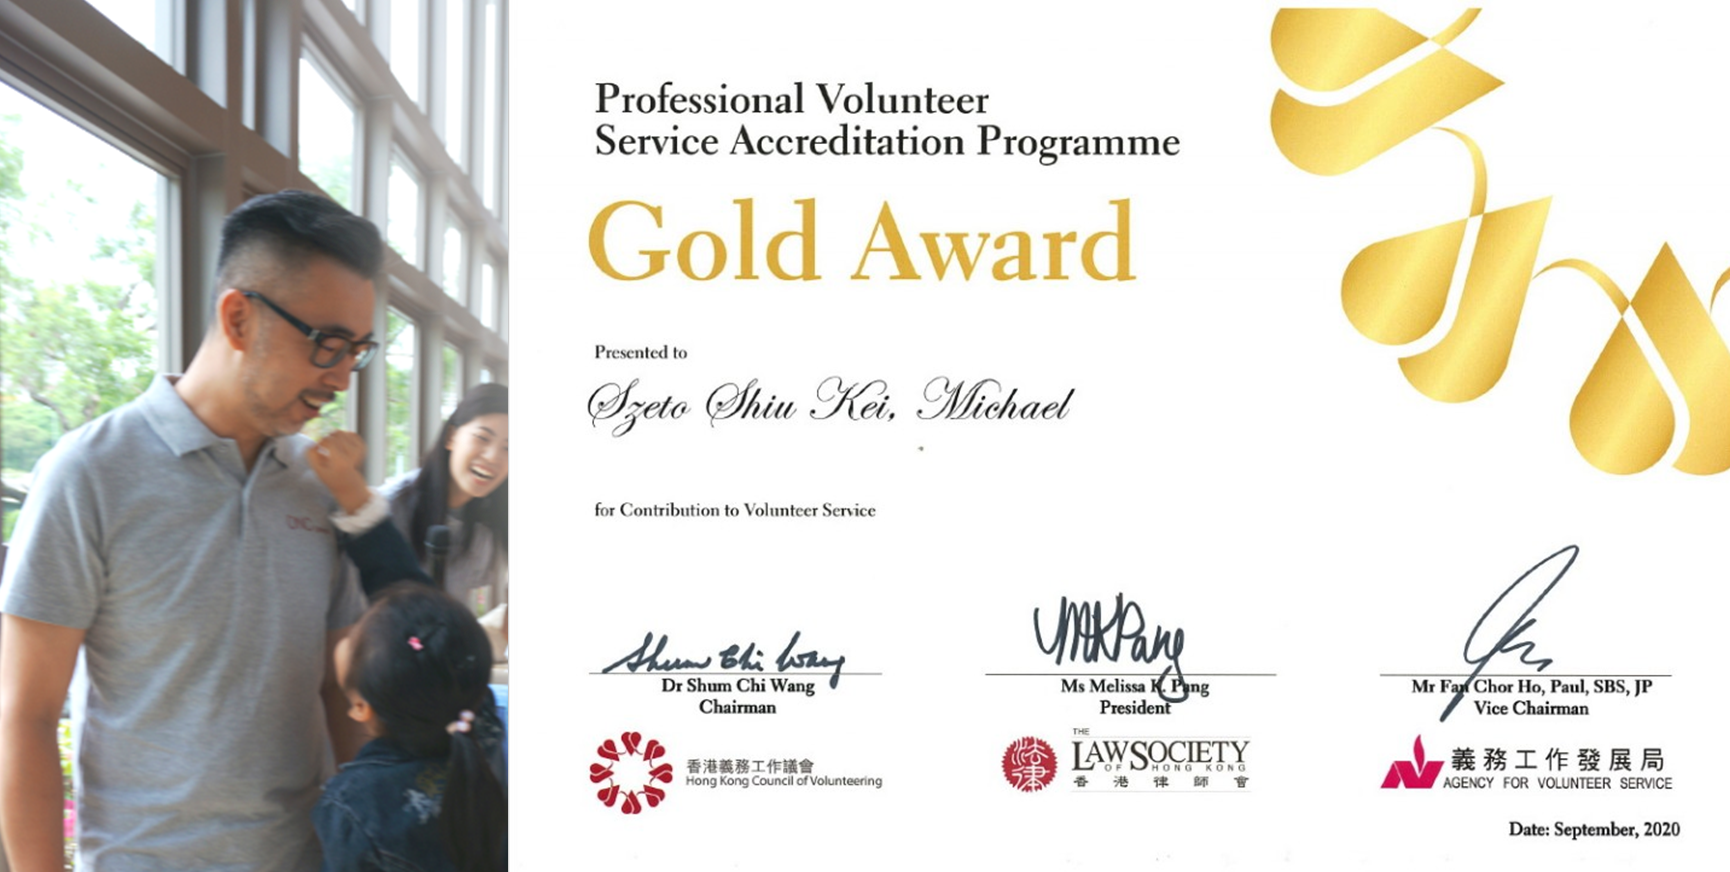 Professional Volunteer Service Accreditation Recognition Programme